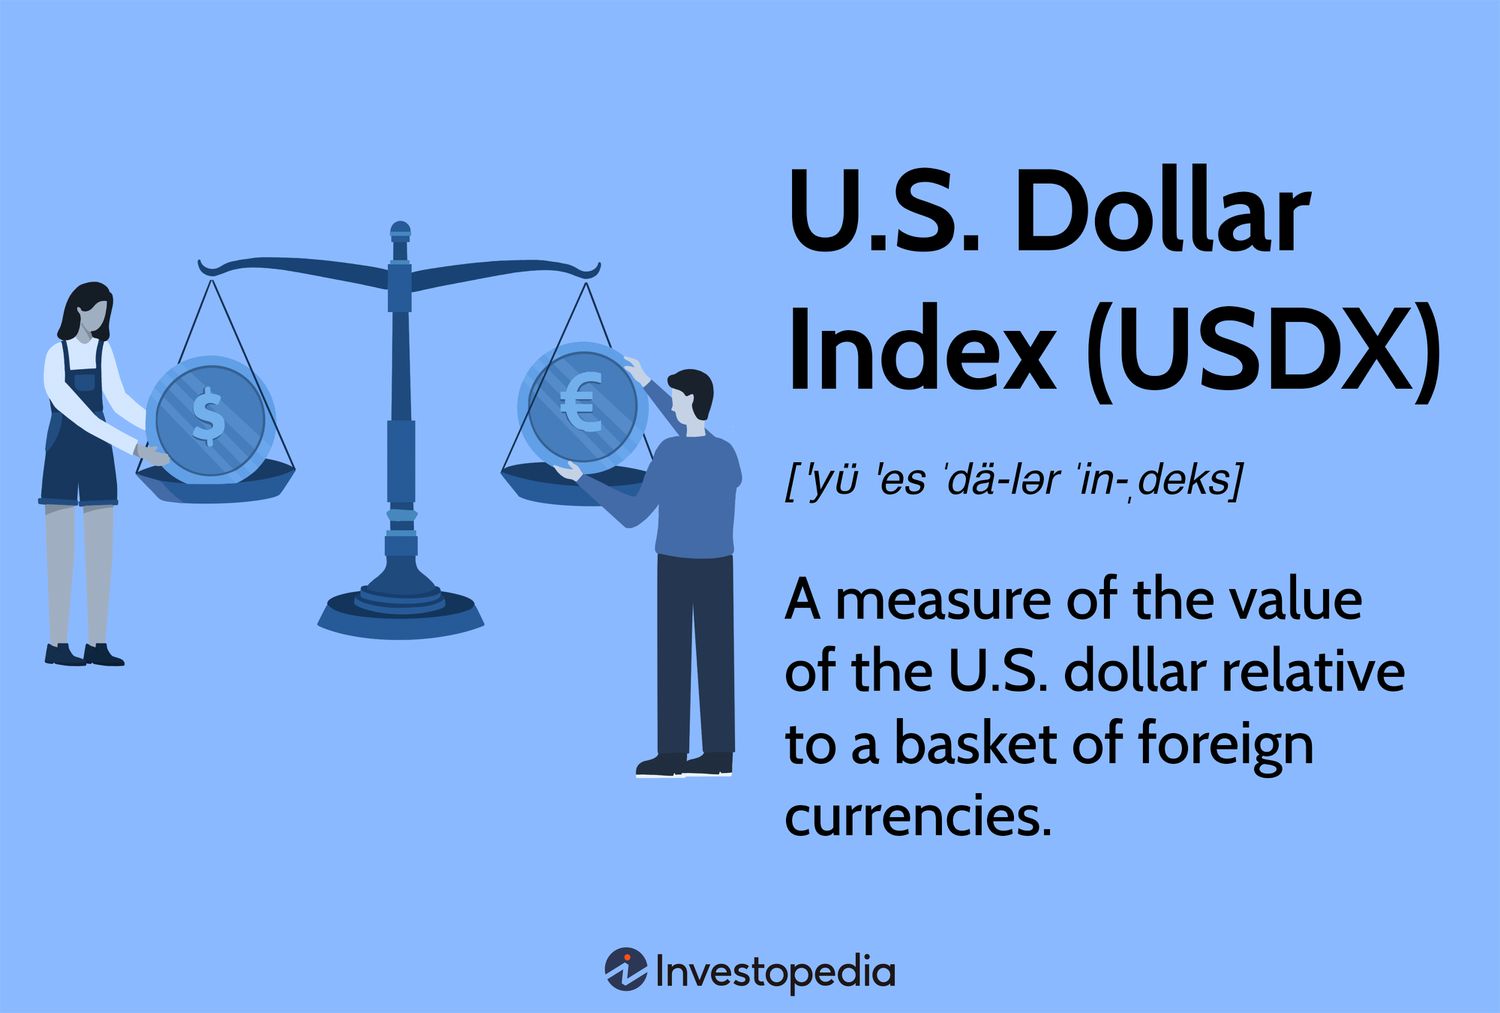 What Is the U.S. Dollar Index (USDX) and How to Trade It